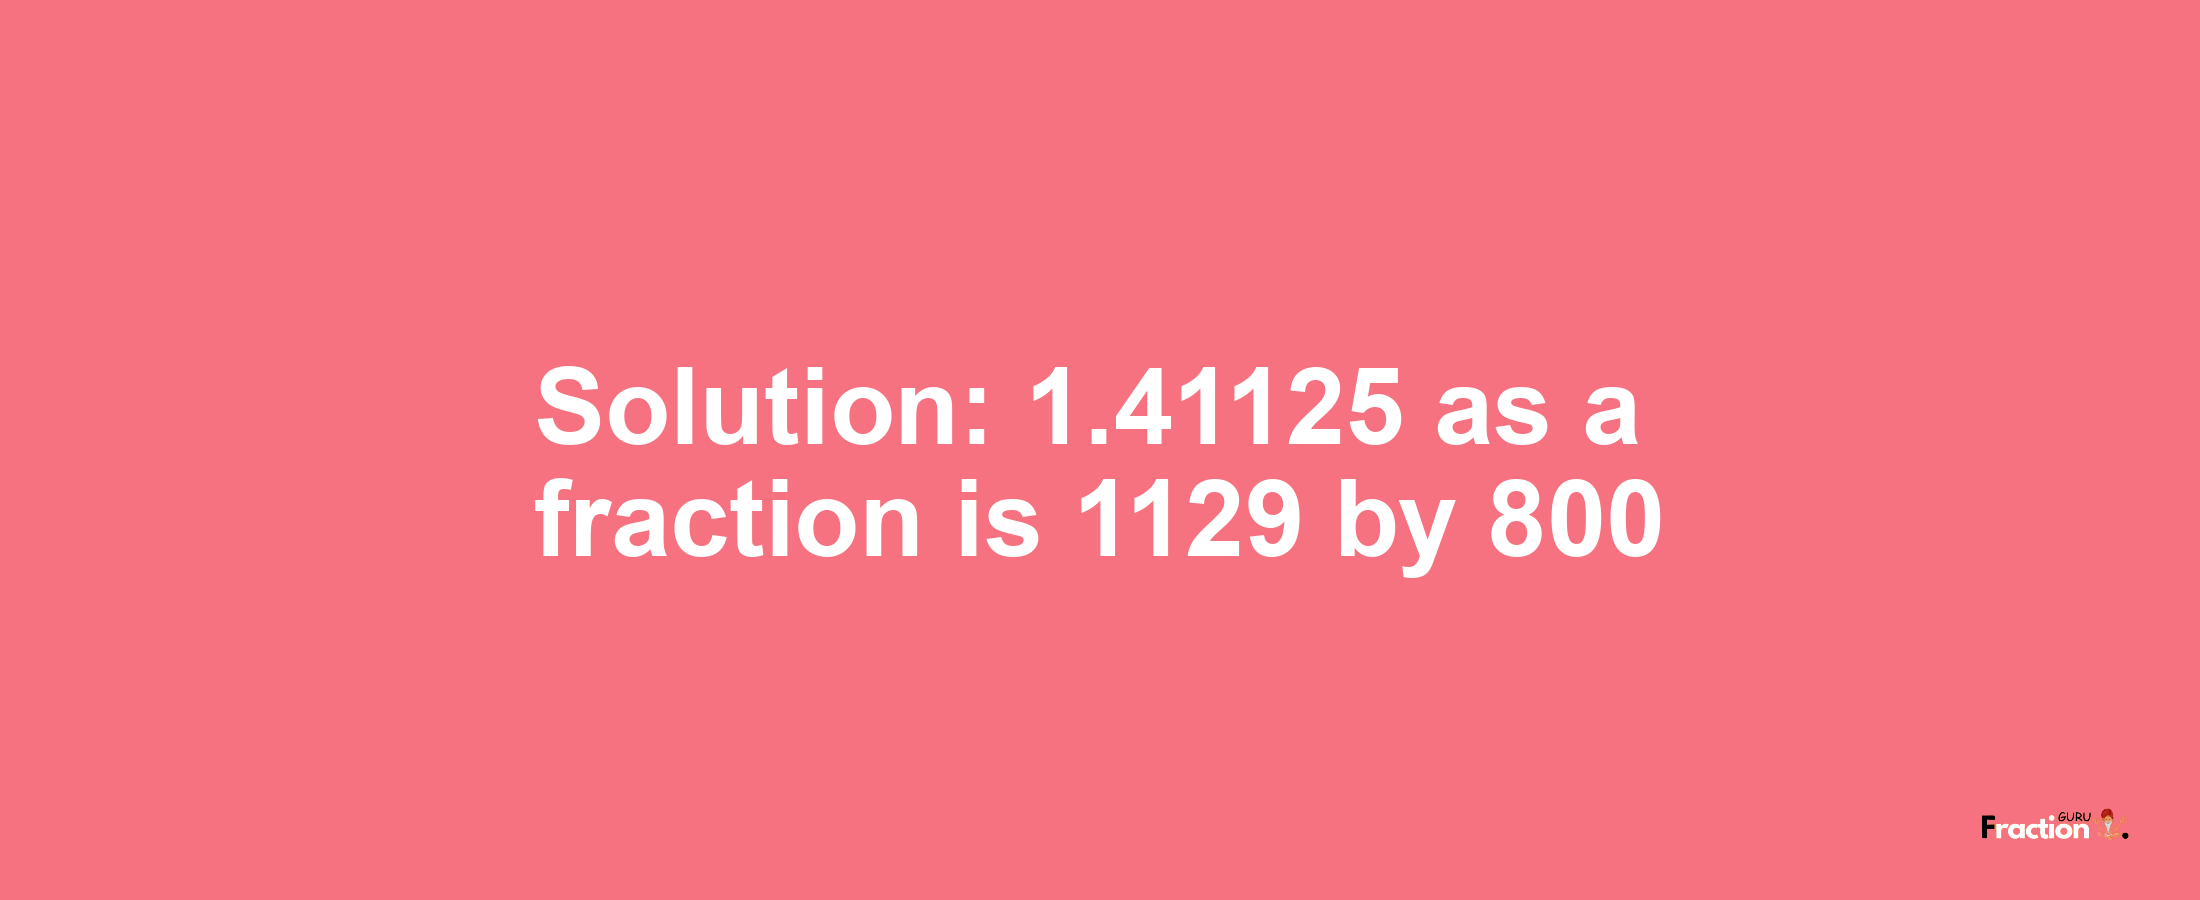 Solution:1.41125 as a fraction is 1129/800